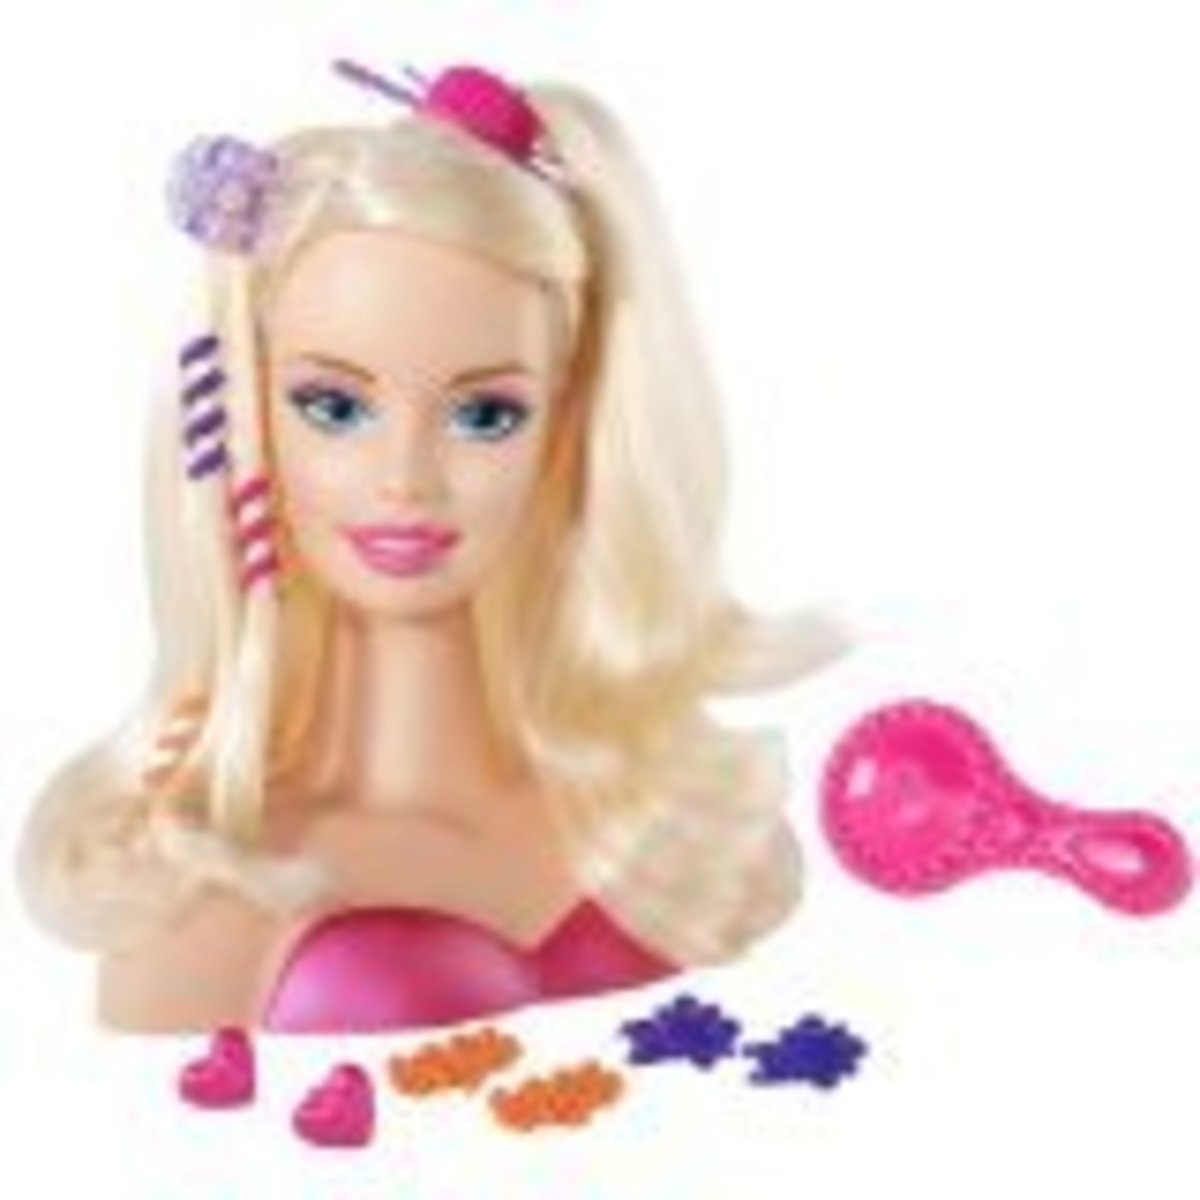 Best Makeup and Styling Head Toys for Kids